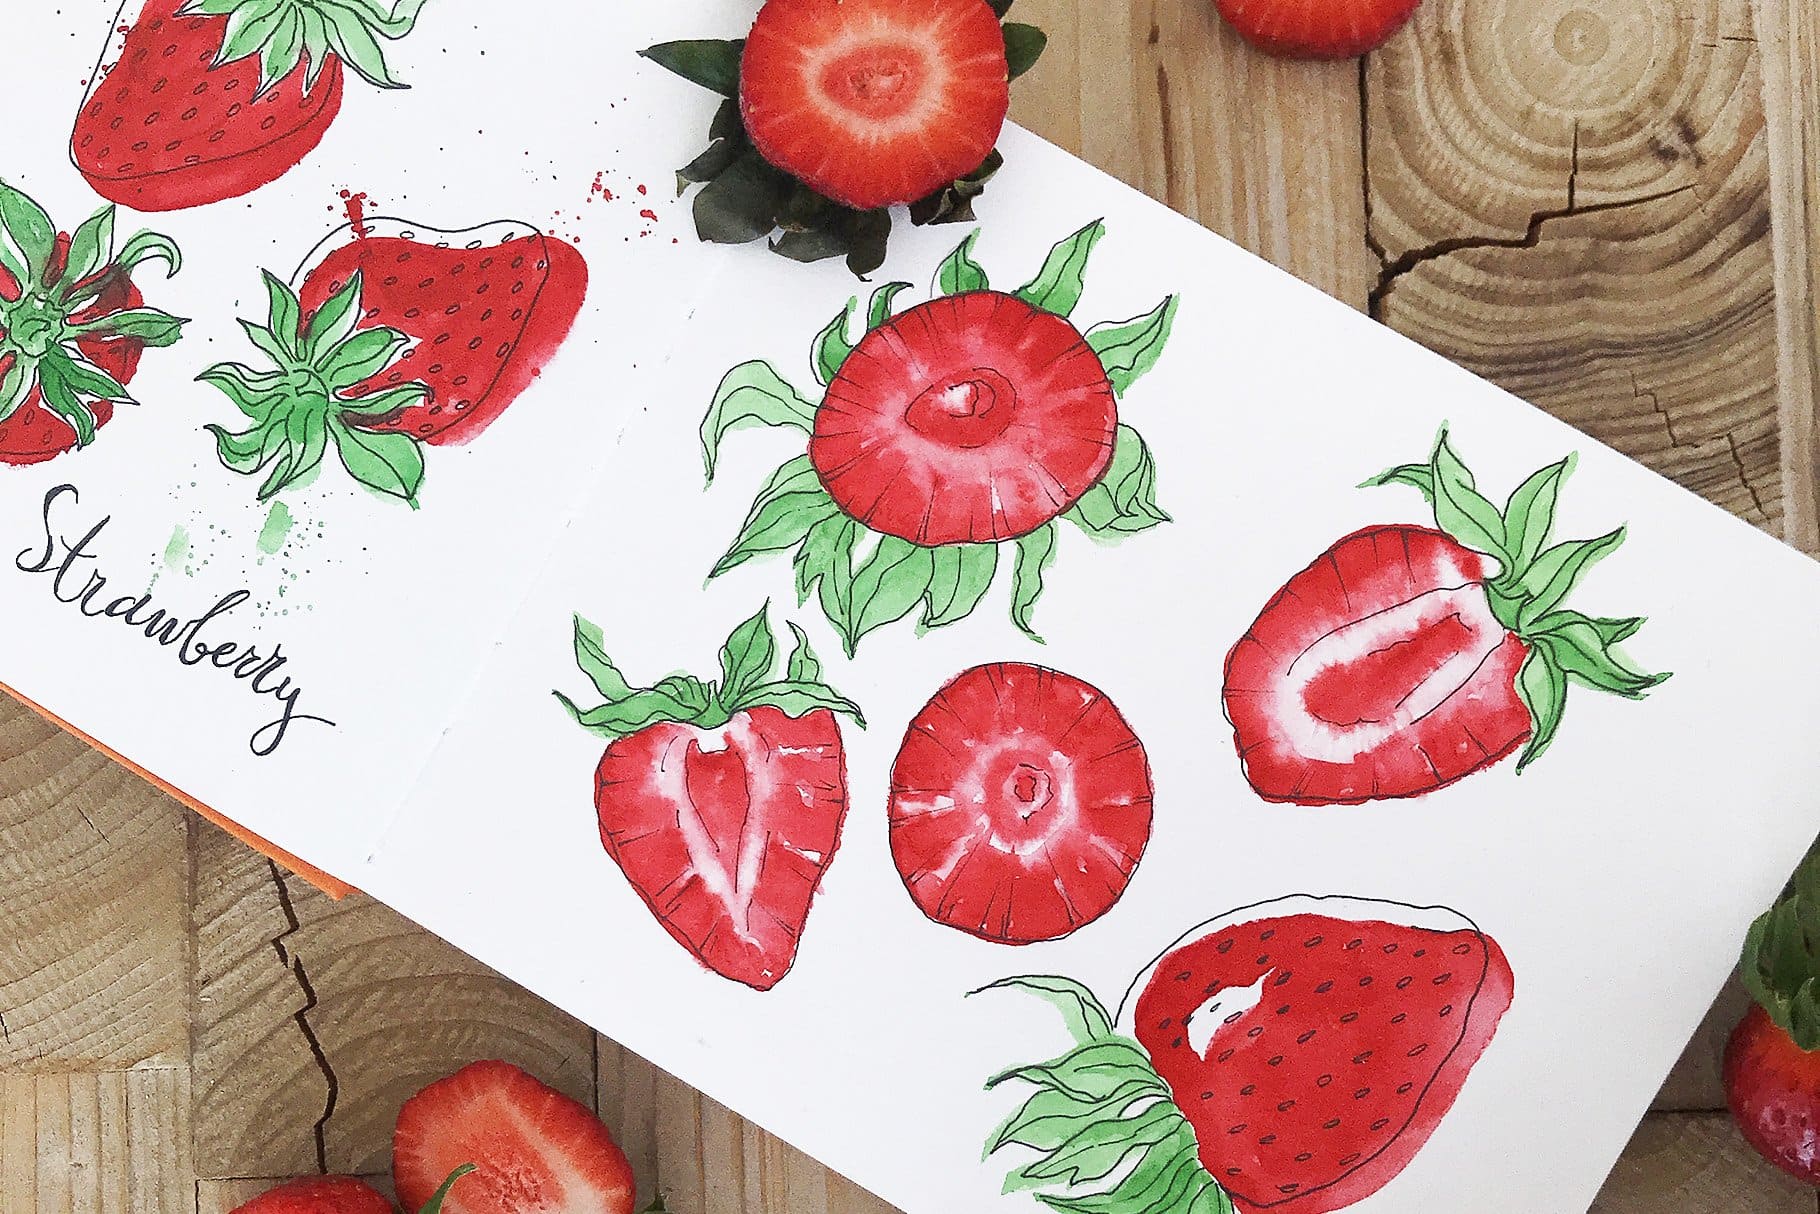 A cut strawberry is drawn in watercolor in detail.